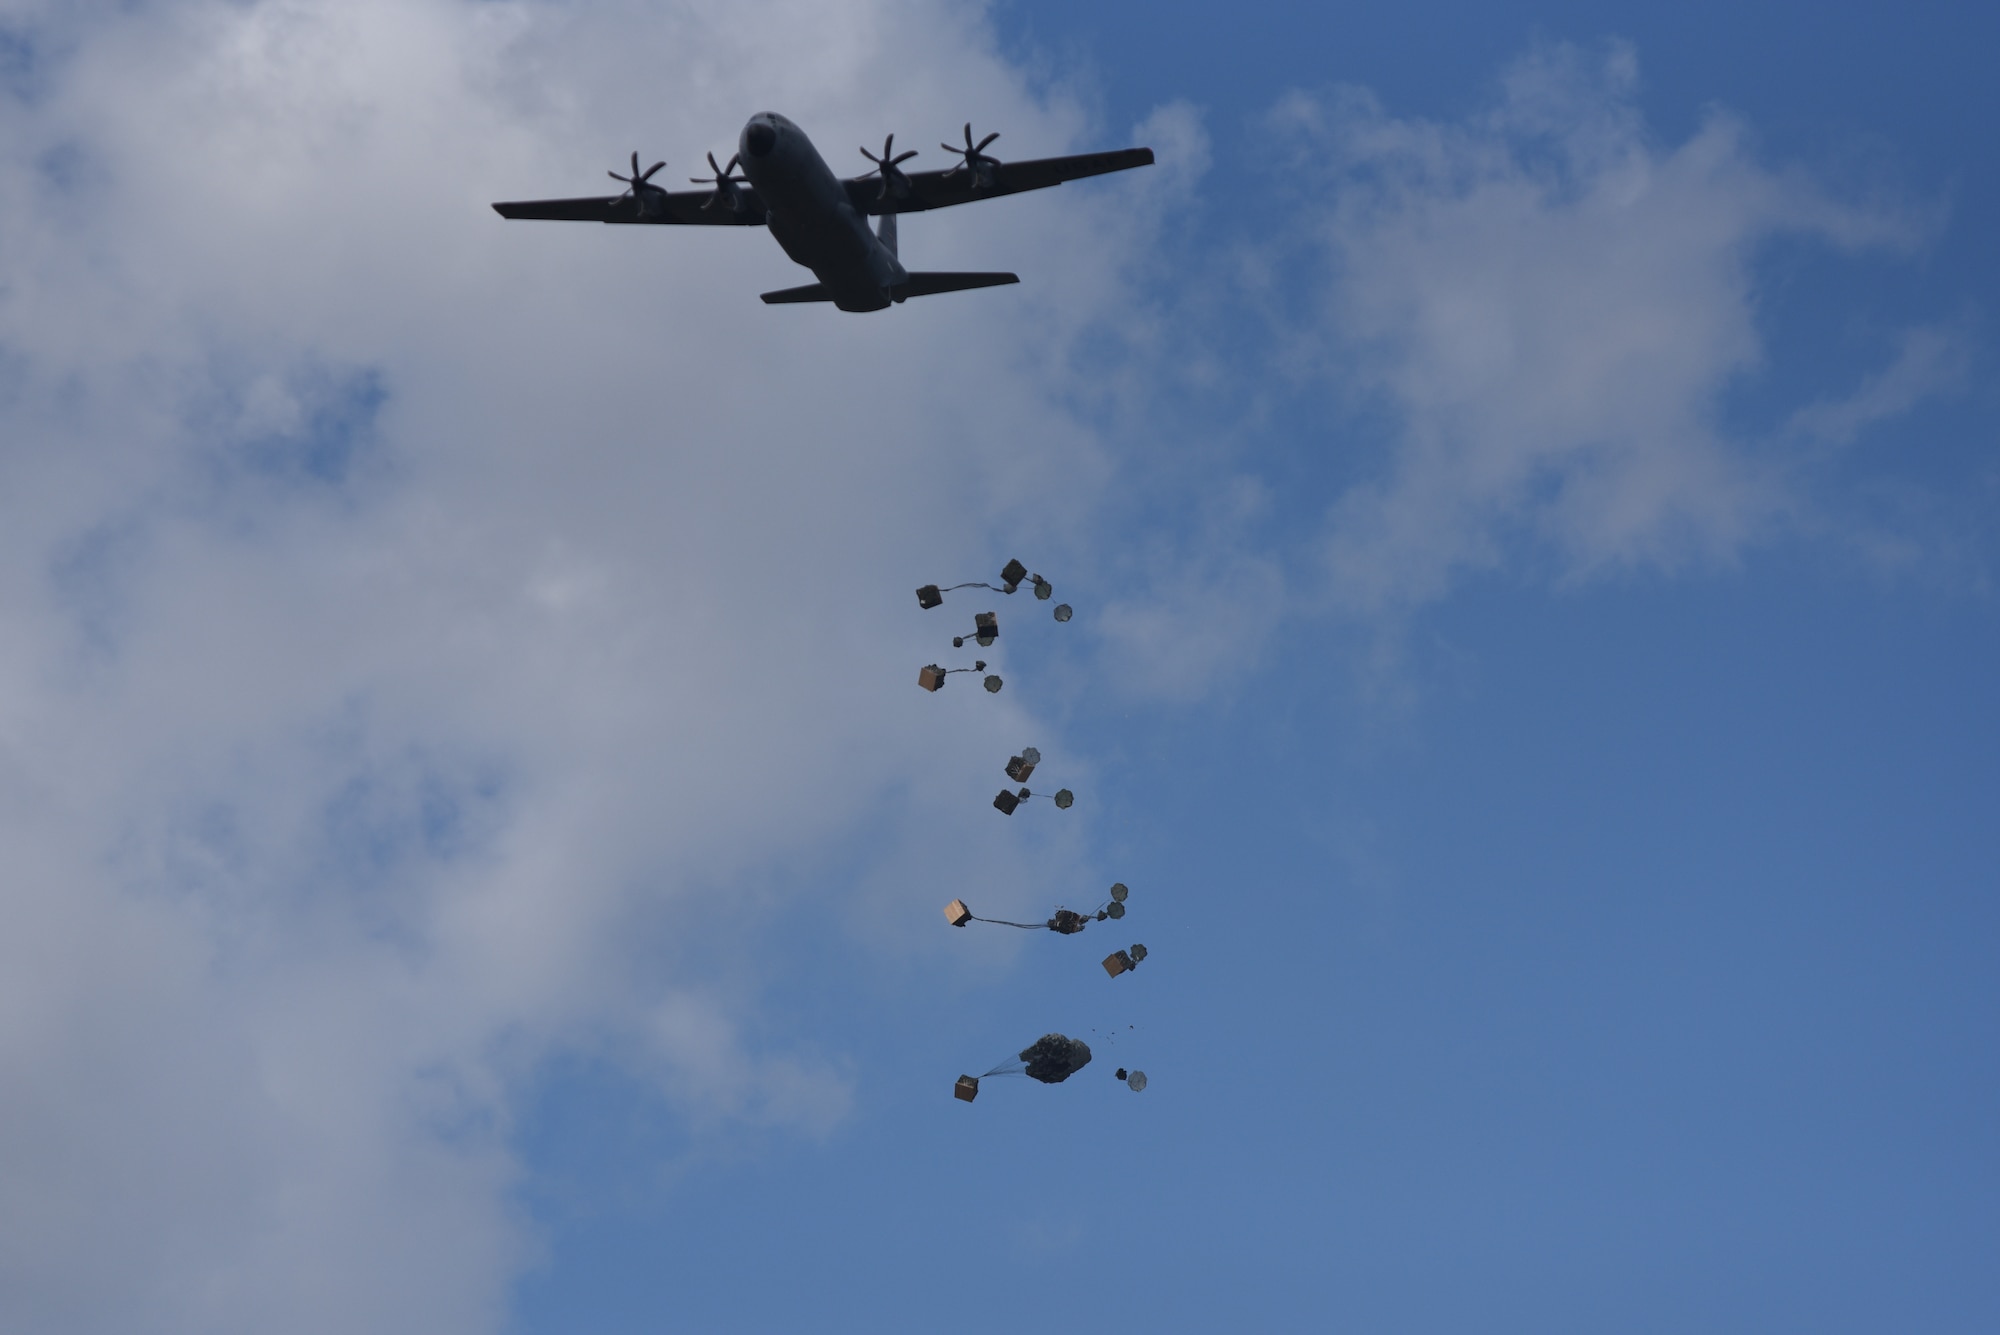 The 815th Airlift Squadron completes an airdrop of container delivery systems during the Army's joint forces exercise Arctic Anvil, Oct. 1-6, over Camp Shelby Joint Forces Training Center, Miss. Reserve Citizen Airmen from the 815th AS assigned to the 403rd Wing at Keesler Air Force Base, Miss., and the 327th AS assigned to the 913th Airlift Group at Little Rock AFB, Ark., provided airlift and airdrop capabilities to the 4th Brigade Combat Team (Airborne), 25th Infantry Division stationed at Joint Base Elmendorf-Richardson, Alaska. (U.S. Air Force photo by Master Sgt. Jessica L. Kendziorek)